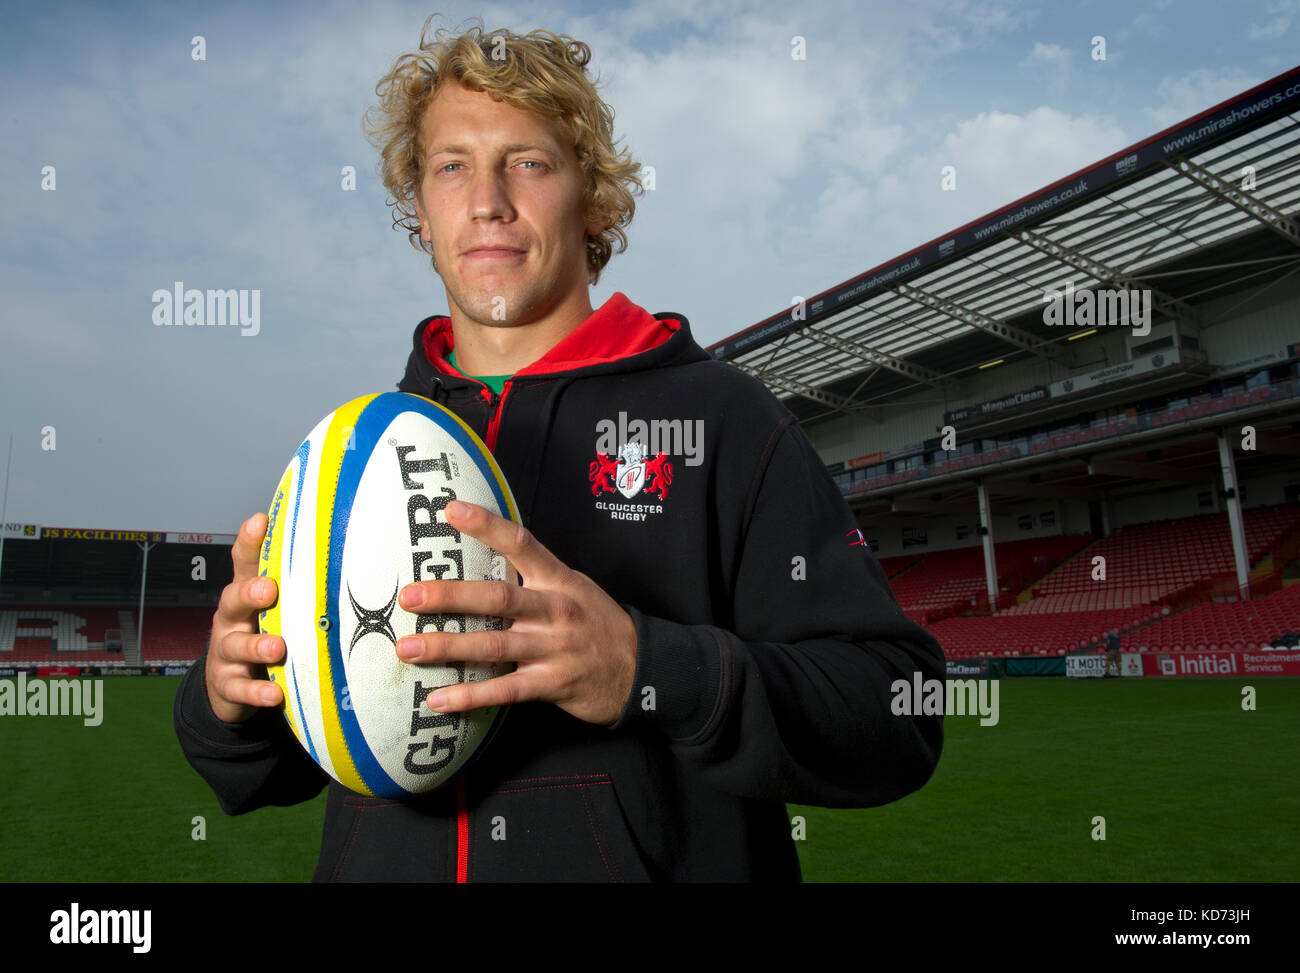 Billy Twelvetrees, Gloucester and England rugby player, photographed at Gloucester RFC. Stock Photo